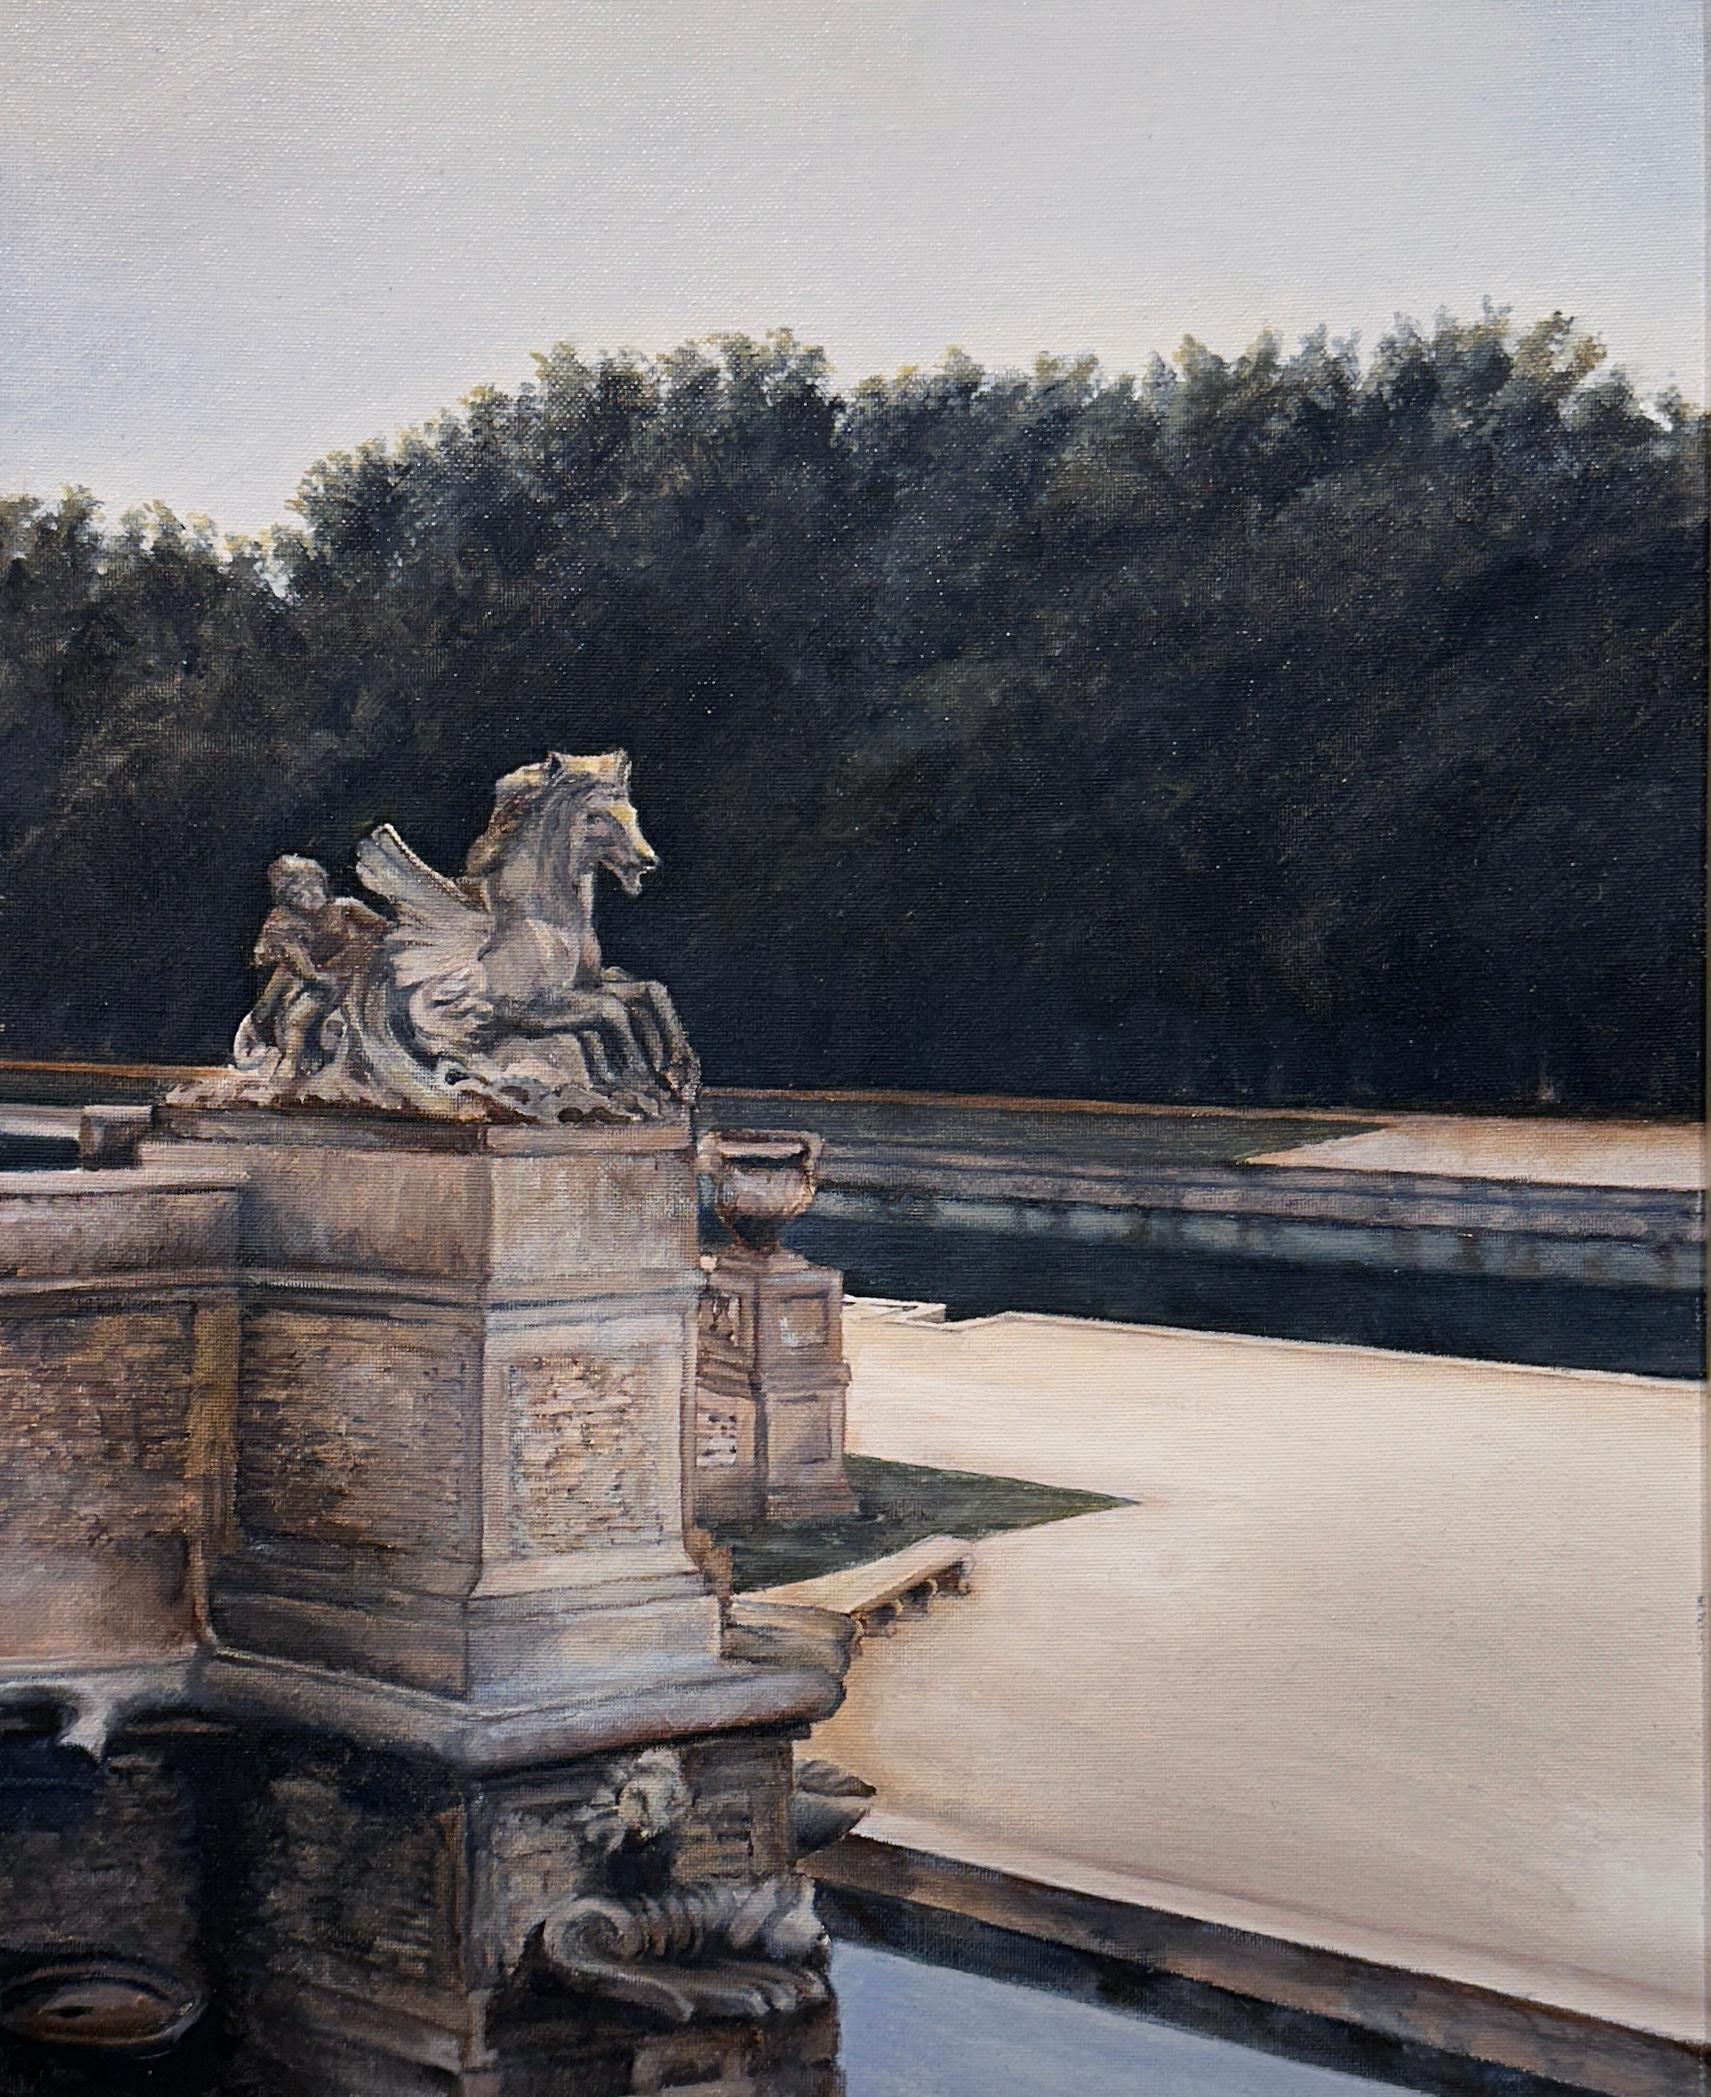 Charioteau - French Landscape with Garden Sculpture & Reflecting Pond, Framed - Painting by Richard Gibbons